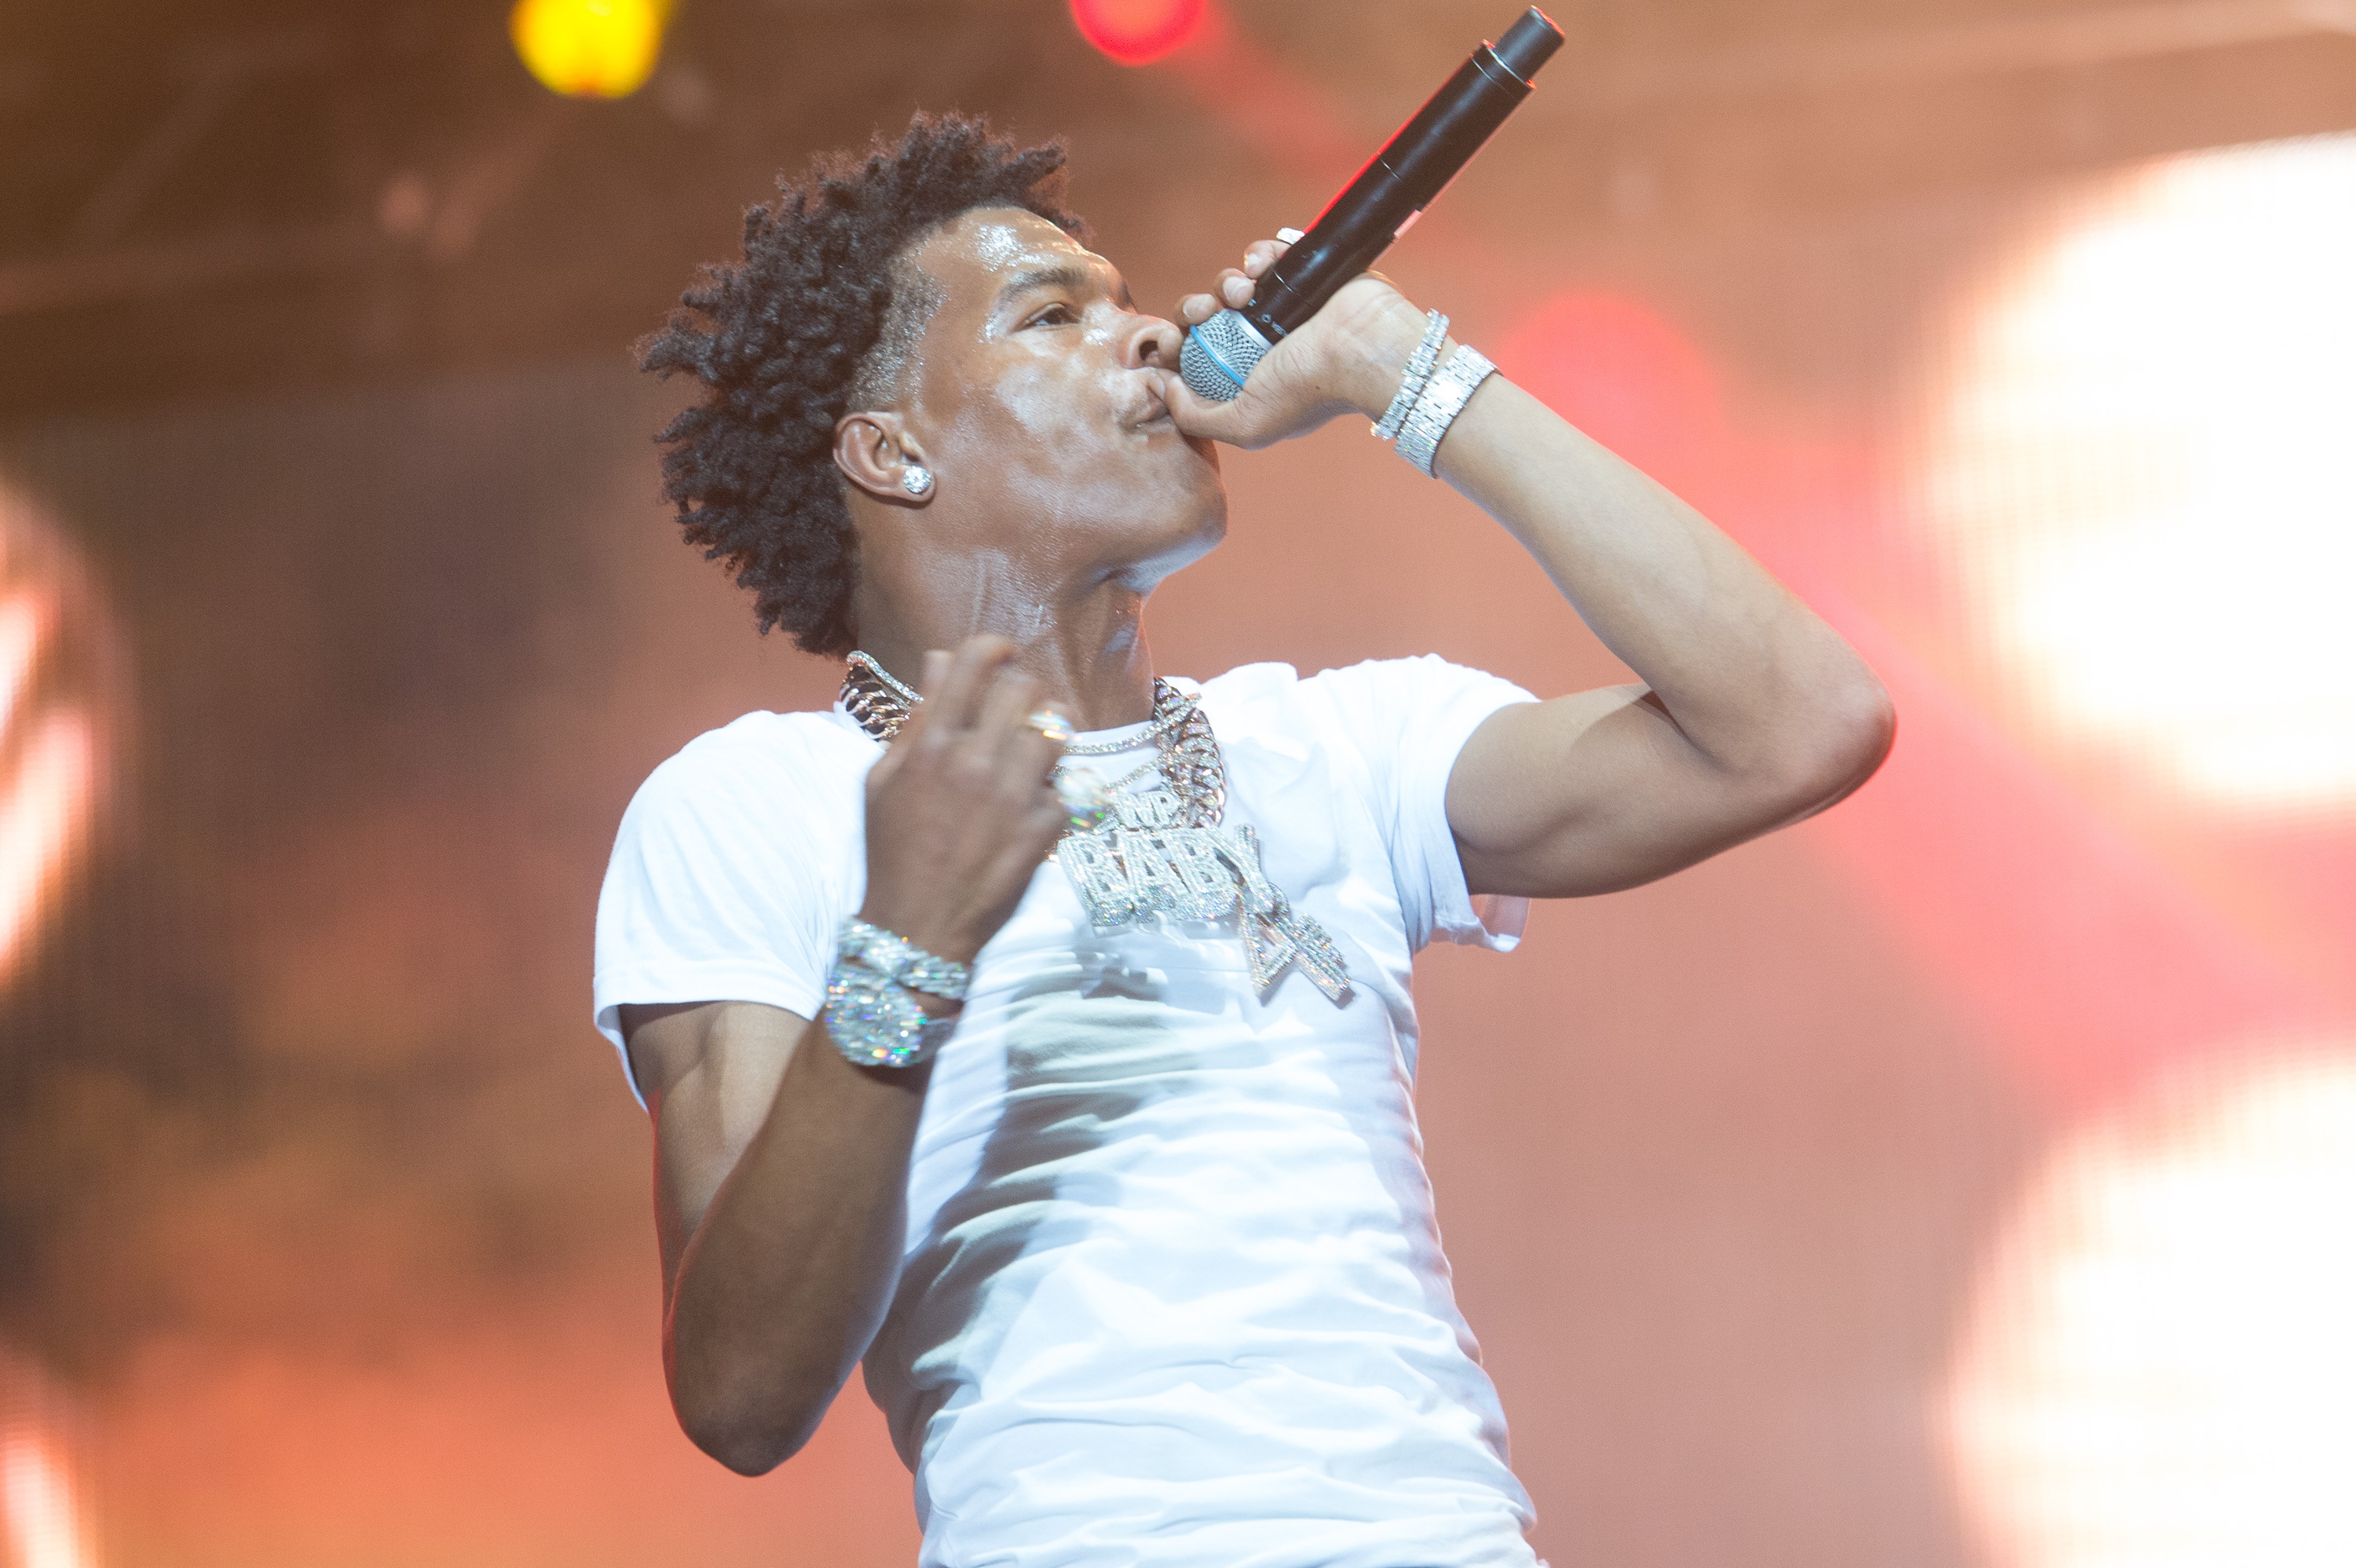 Lil Baby Performs at Reading Festival 2019 Sunday - Little John's Farm, Reading